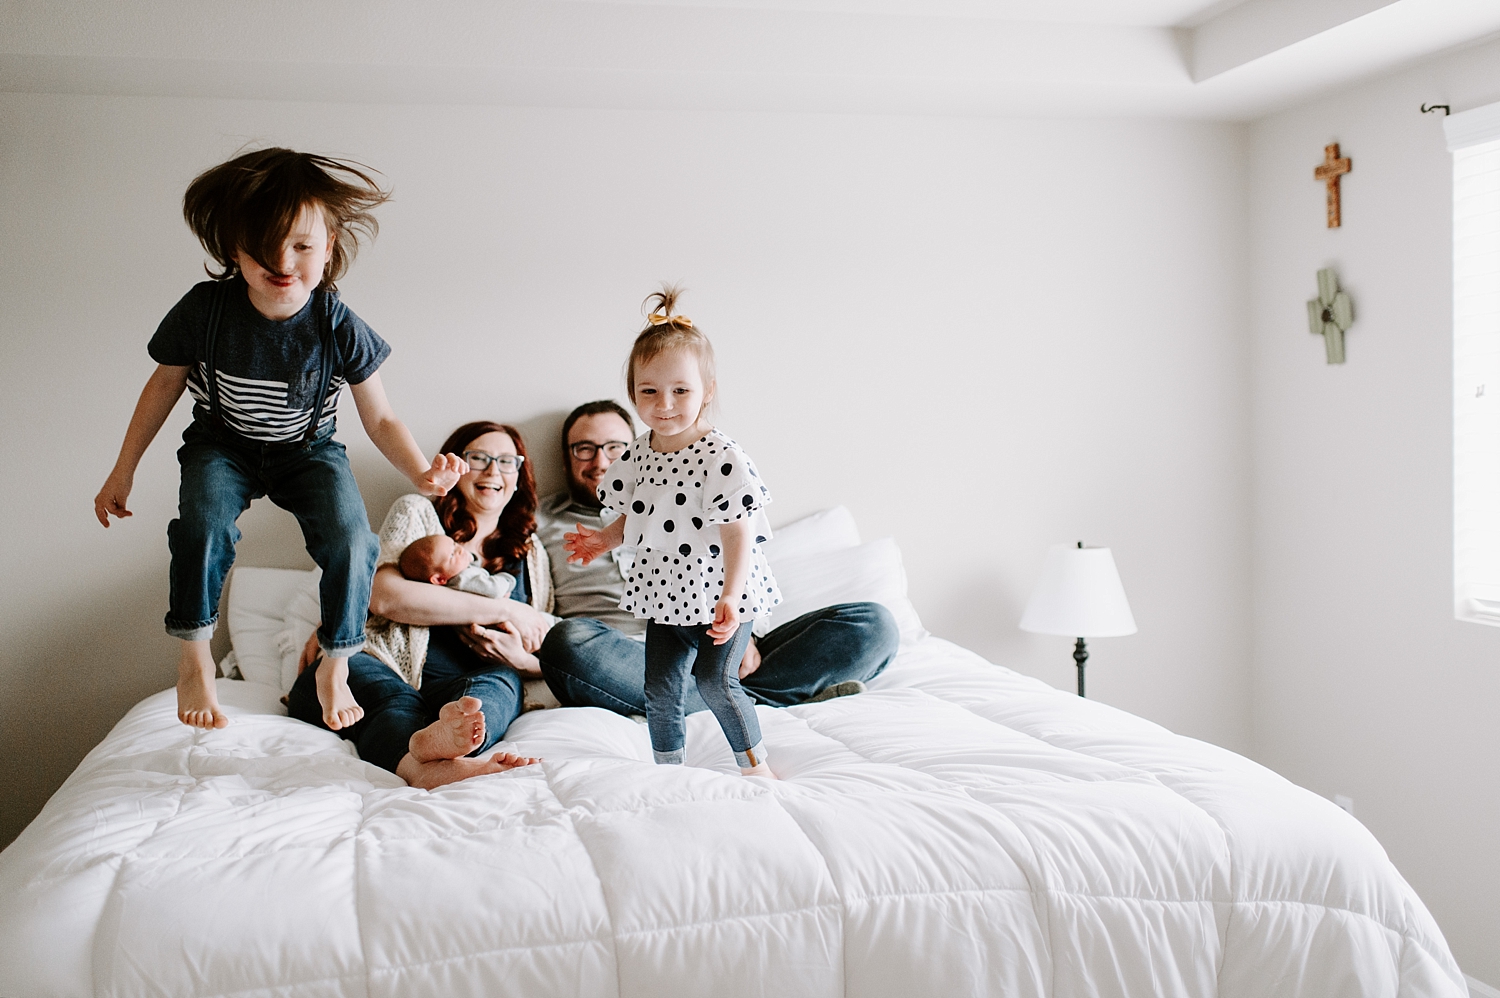 Toddlers jump on bed around parents and new baby during lifestyle photoshoot with Newborn Photographer, Meg Newton Photography